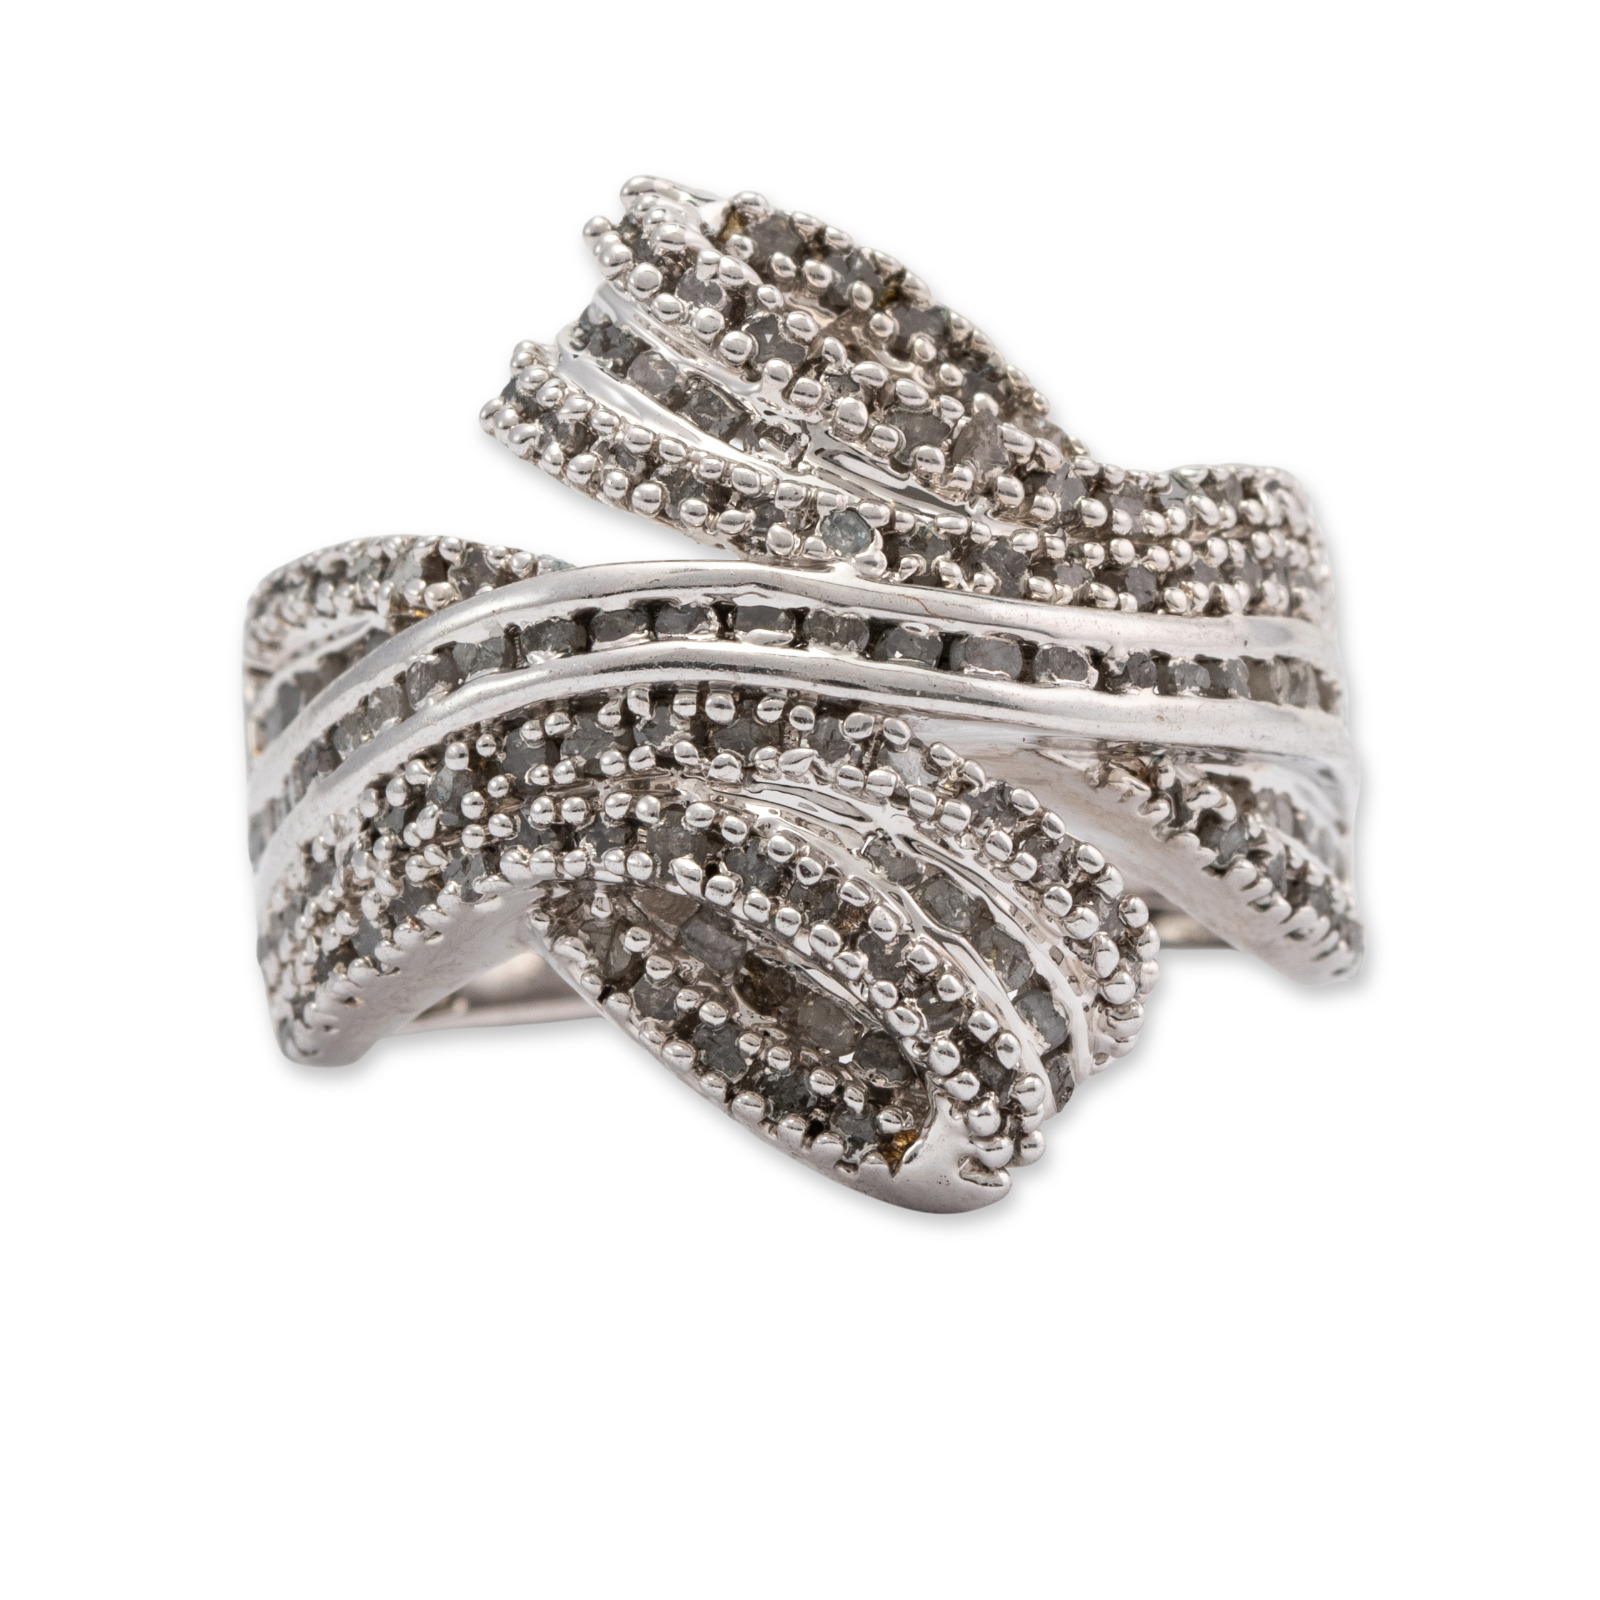 ESTATE STERLING SILVER DIAMOND COCKTAIL RING 9 - image 1